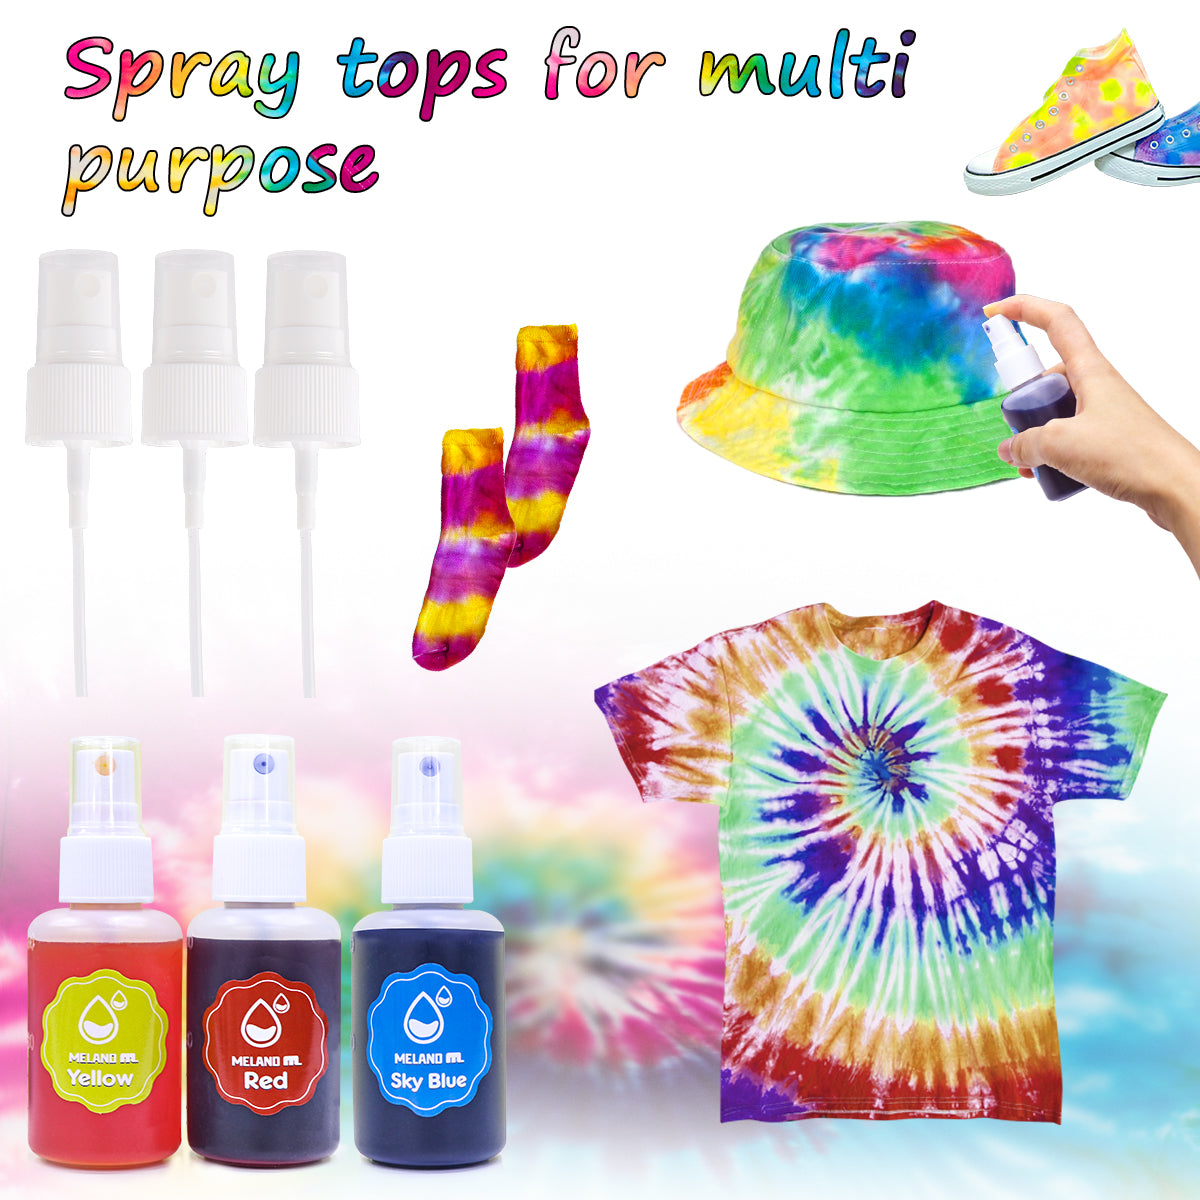 Meland Tie Dye Kit with 3 White T-Shirts, 18 Colors DIY Fabric Tye Dye for  Clothes, Arts and Craft for Kids Girls Age 8-12 Year Old, Birthday  Christmas Gift for Girls 4,5,6,7,8,9,10,11,12